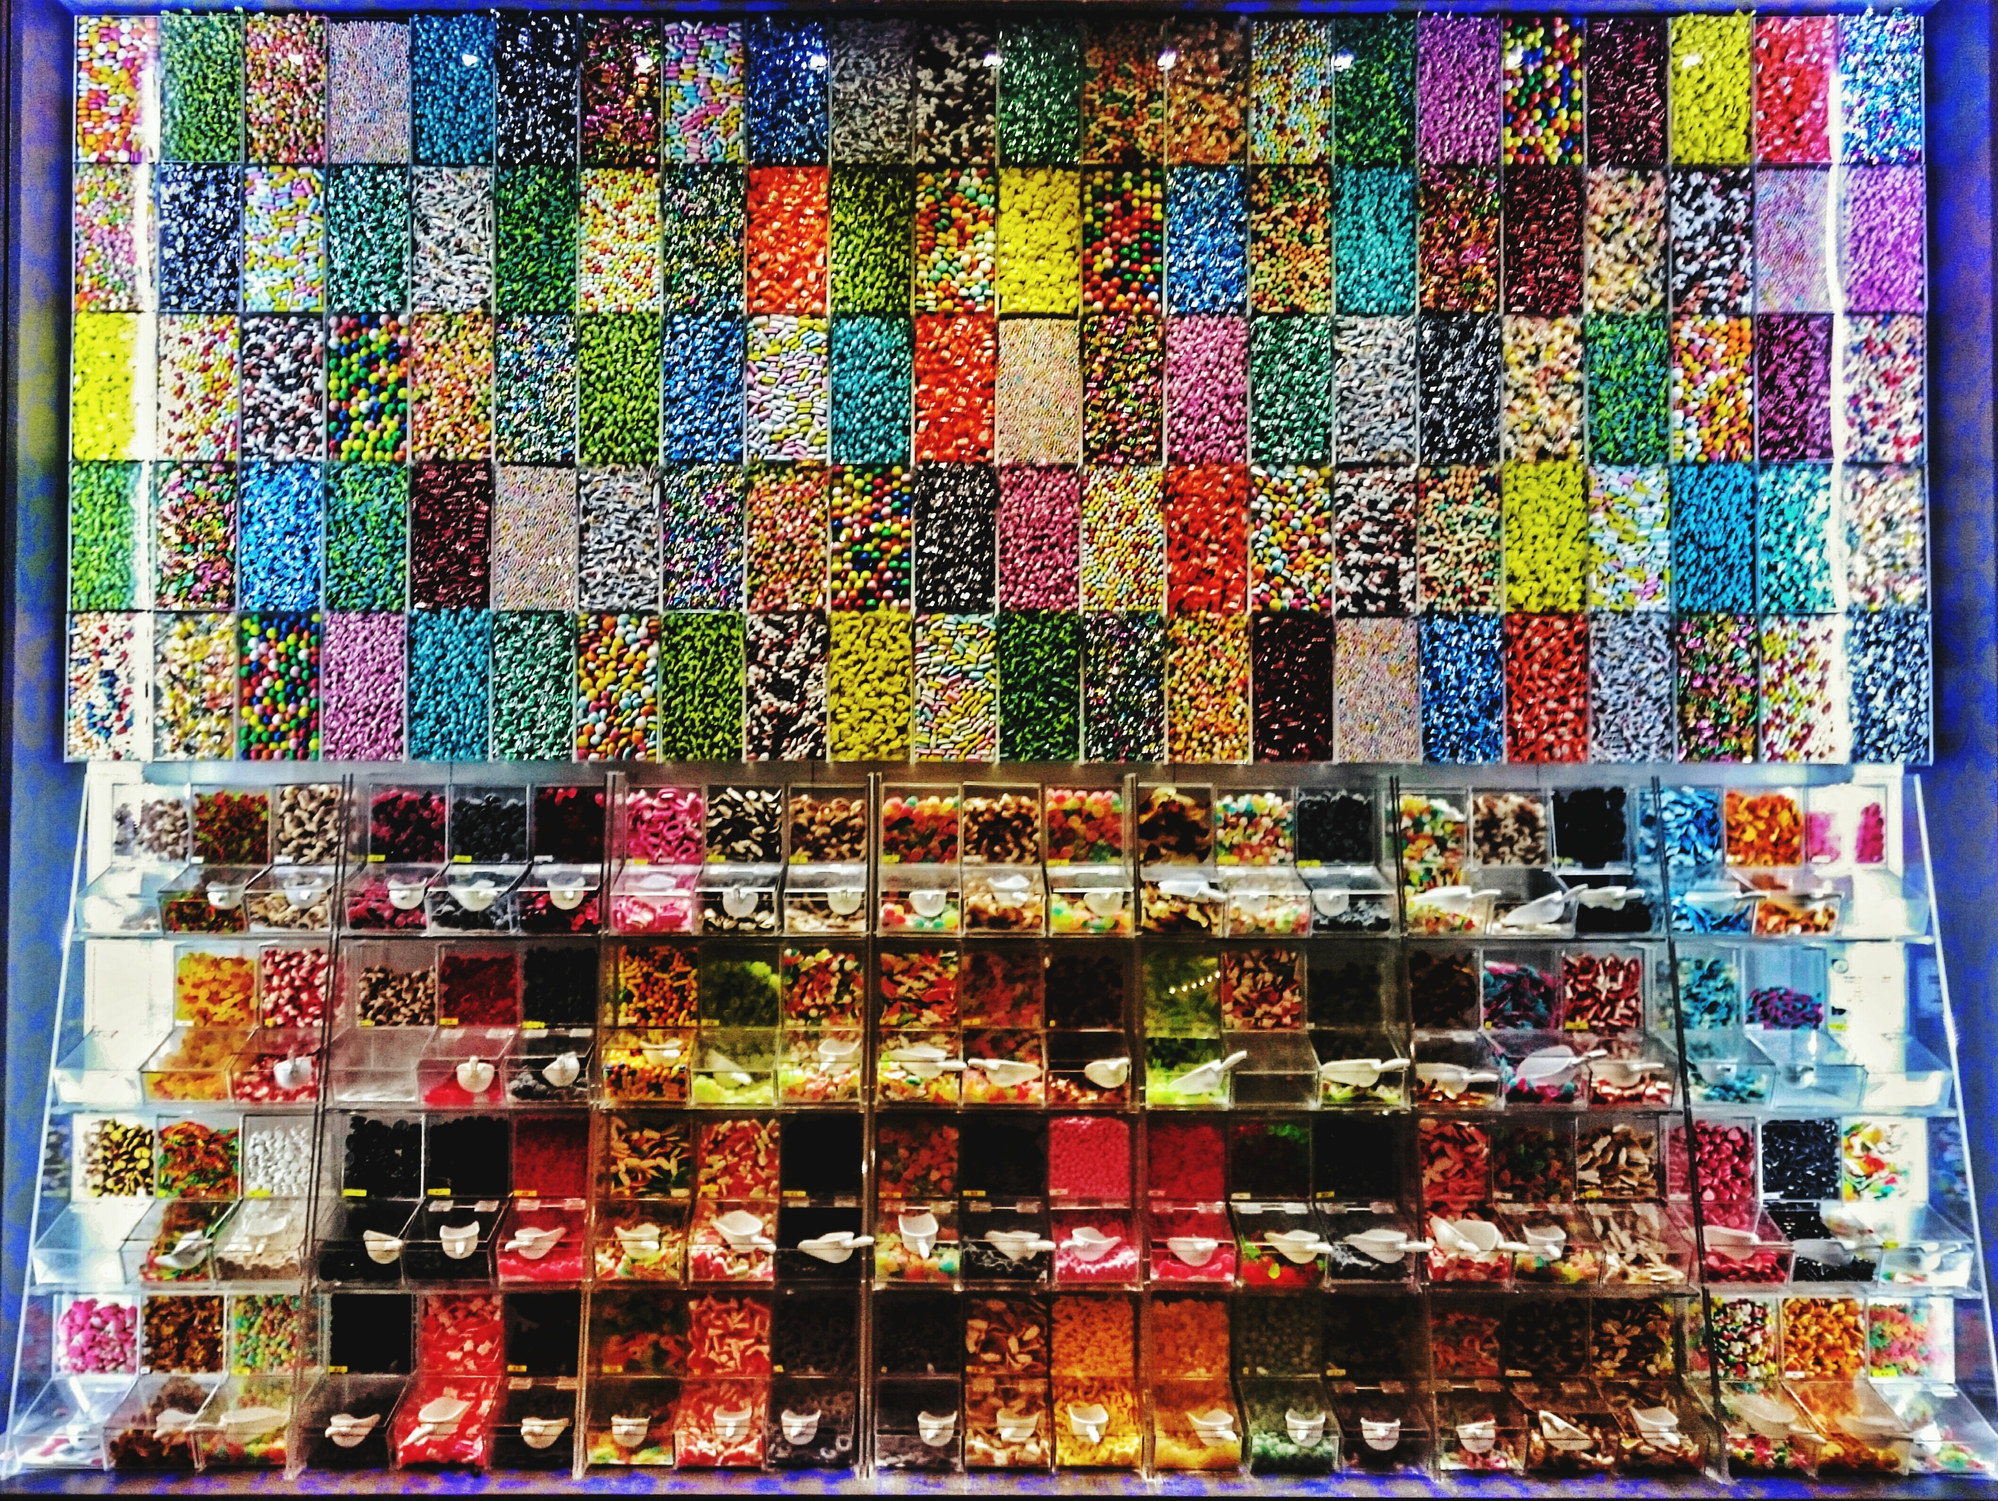 Candy on display.